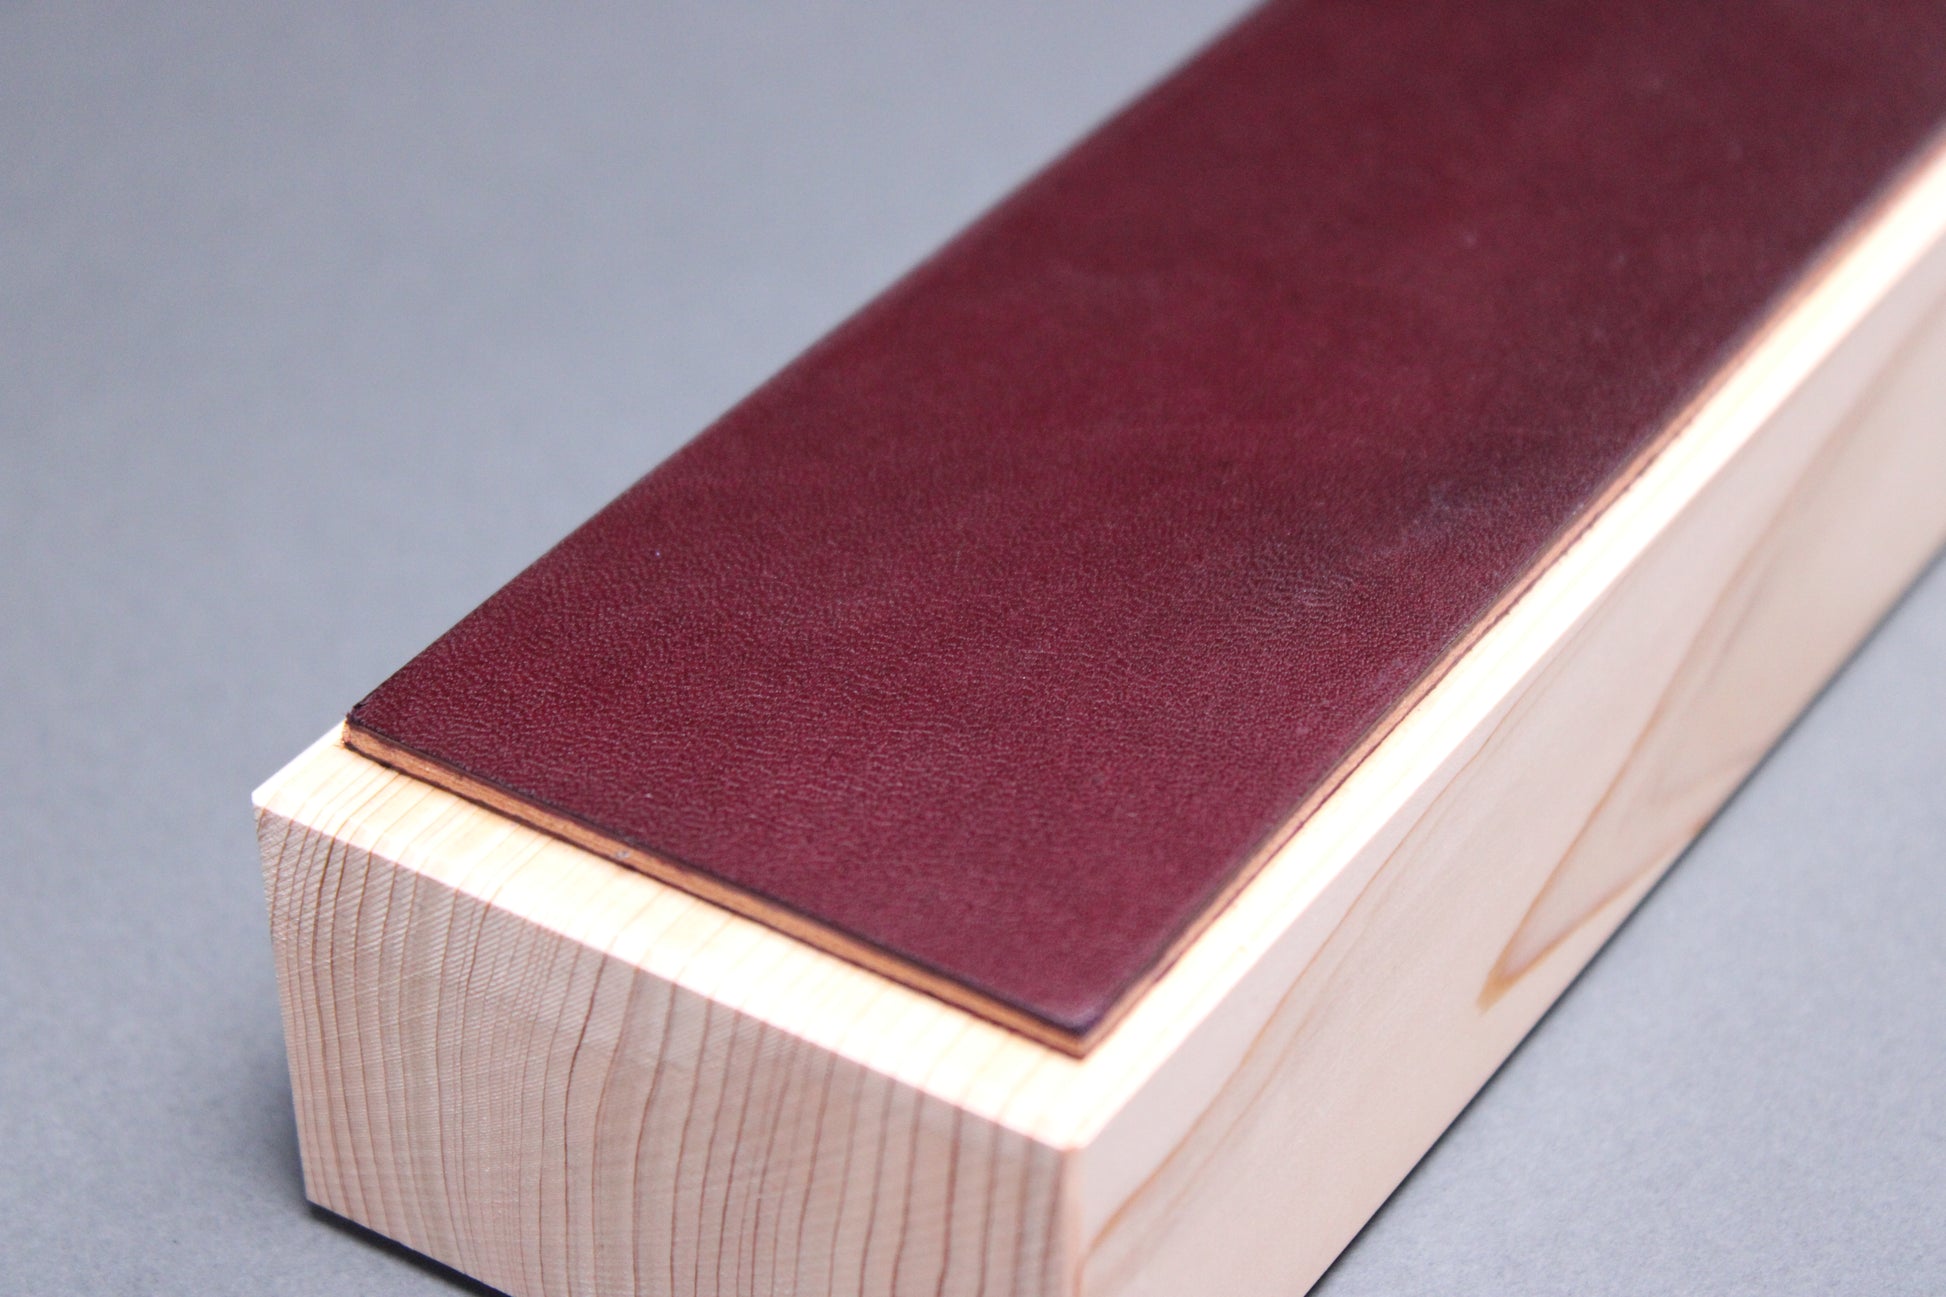 textured surface of plum purple leather perfect for knife stropping atop sturdy tall hinoki wood base adequate height for knuckle clearance with grey background closeup shot